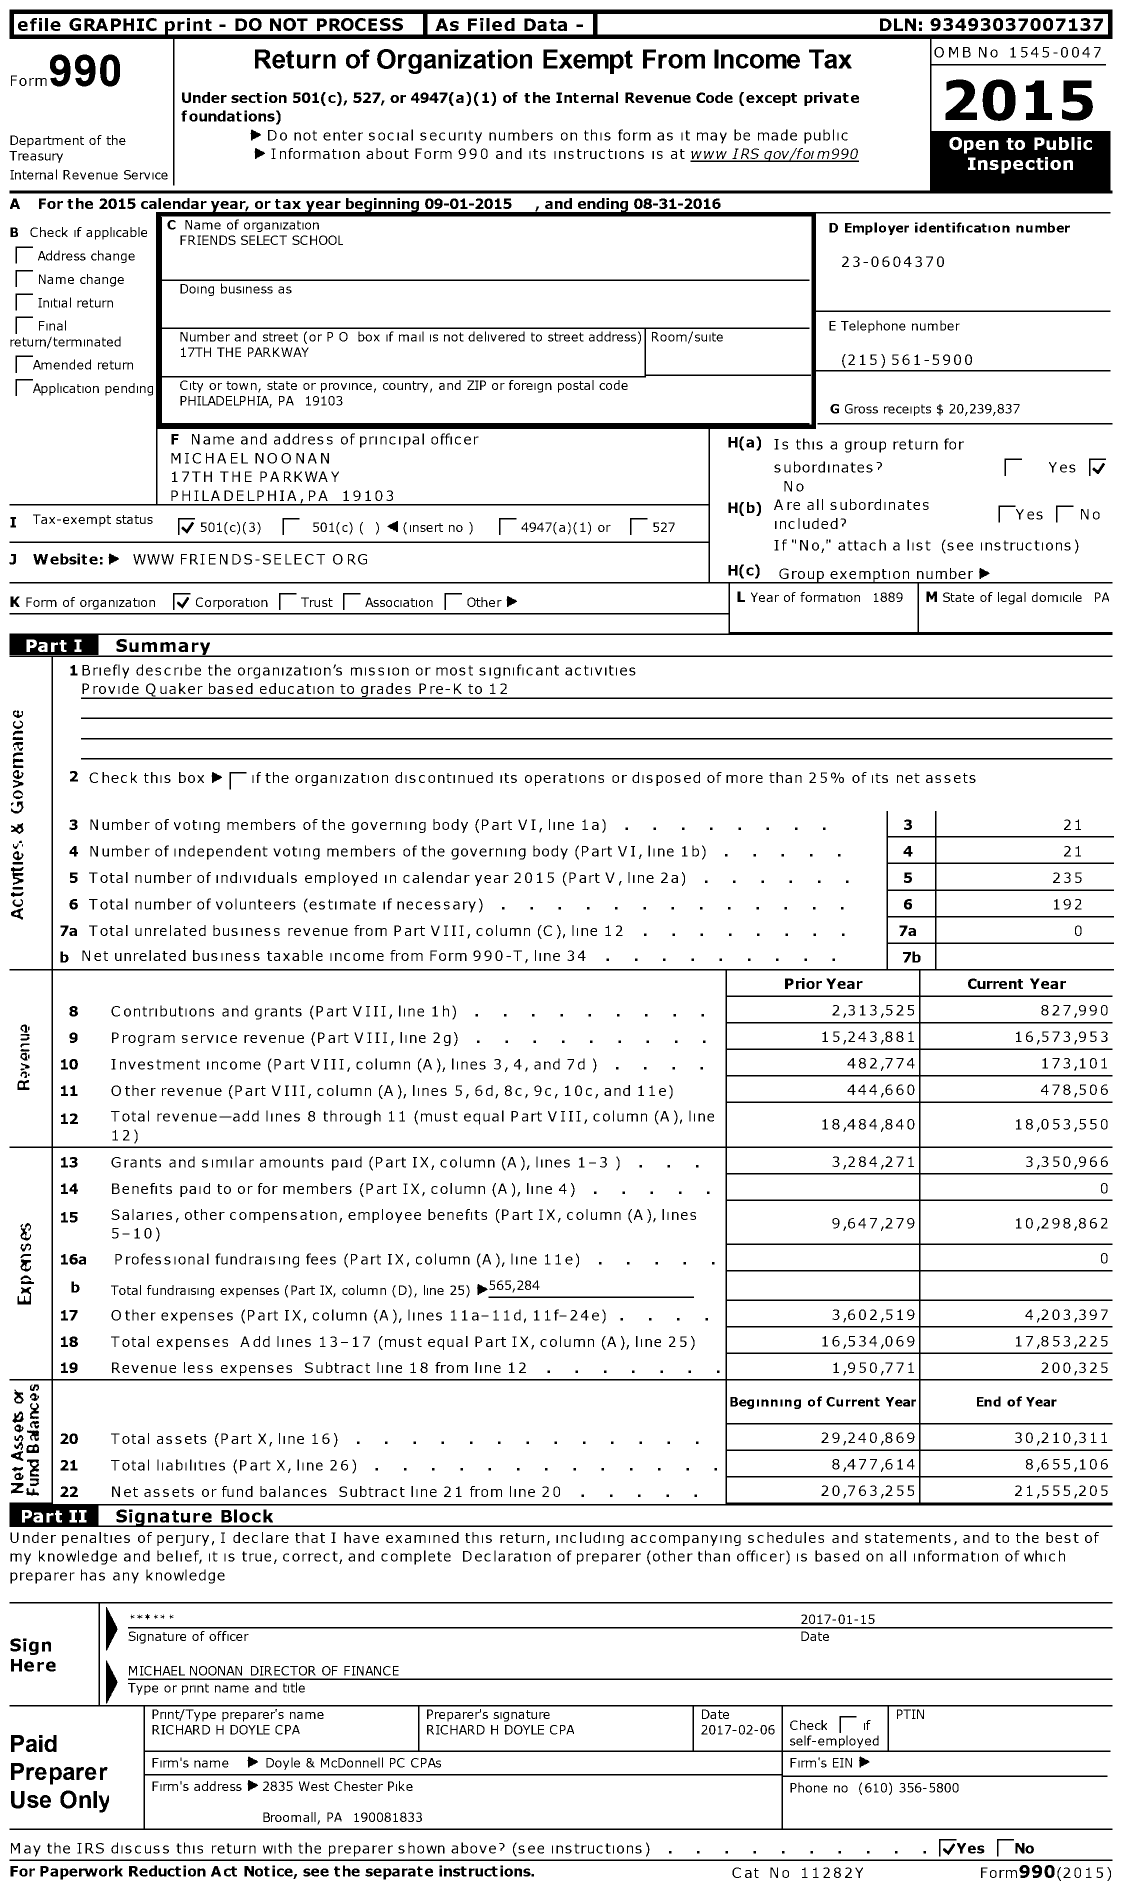 Image of first page of 2015 Form 990 for Friends Select School (FSS)